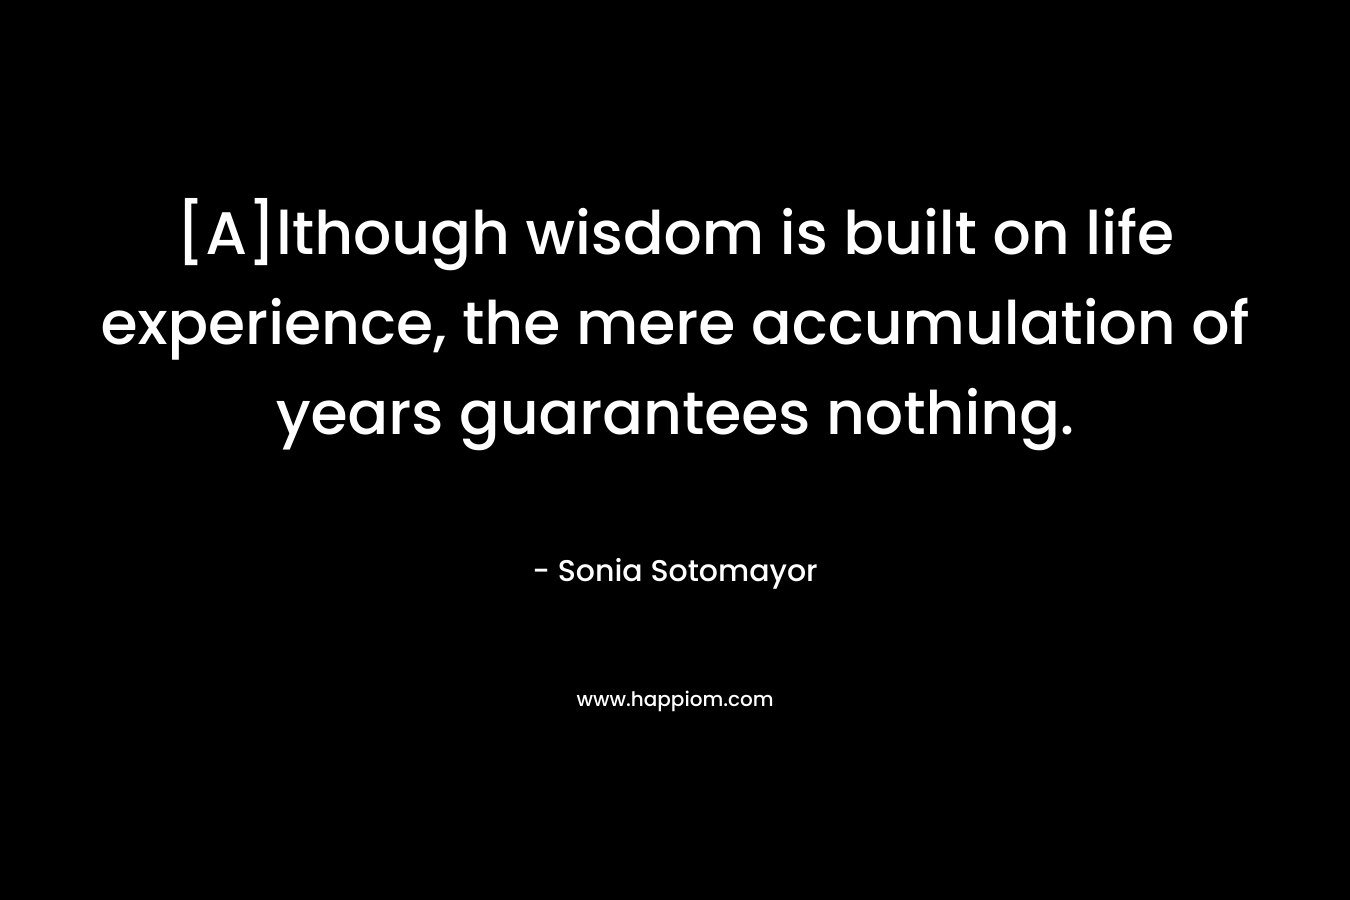 [A]lthough wisdom is built on life experience, the mere accumulation of years guarantees nothing. – Sonia Sotomayor